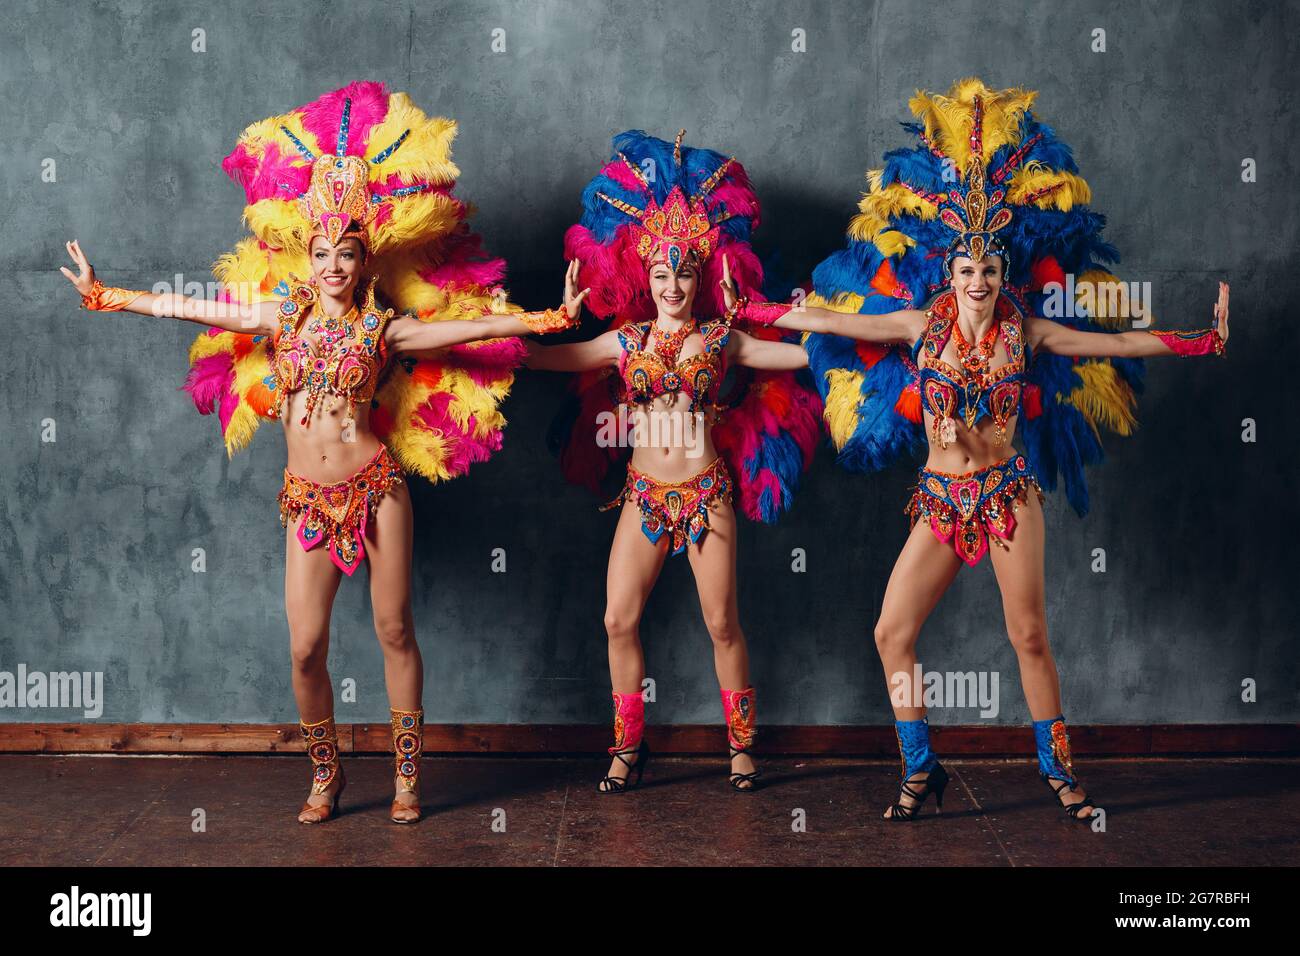 https://c8.alamy.com/comp/2G7RBFH/three-woman-in-brazilian-samba-carnival-costume-with-colorful-feathers-plumage-full-lenght-hight-gray-vintage-background-2G7RBFH.jpg